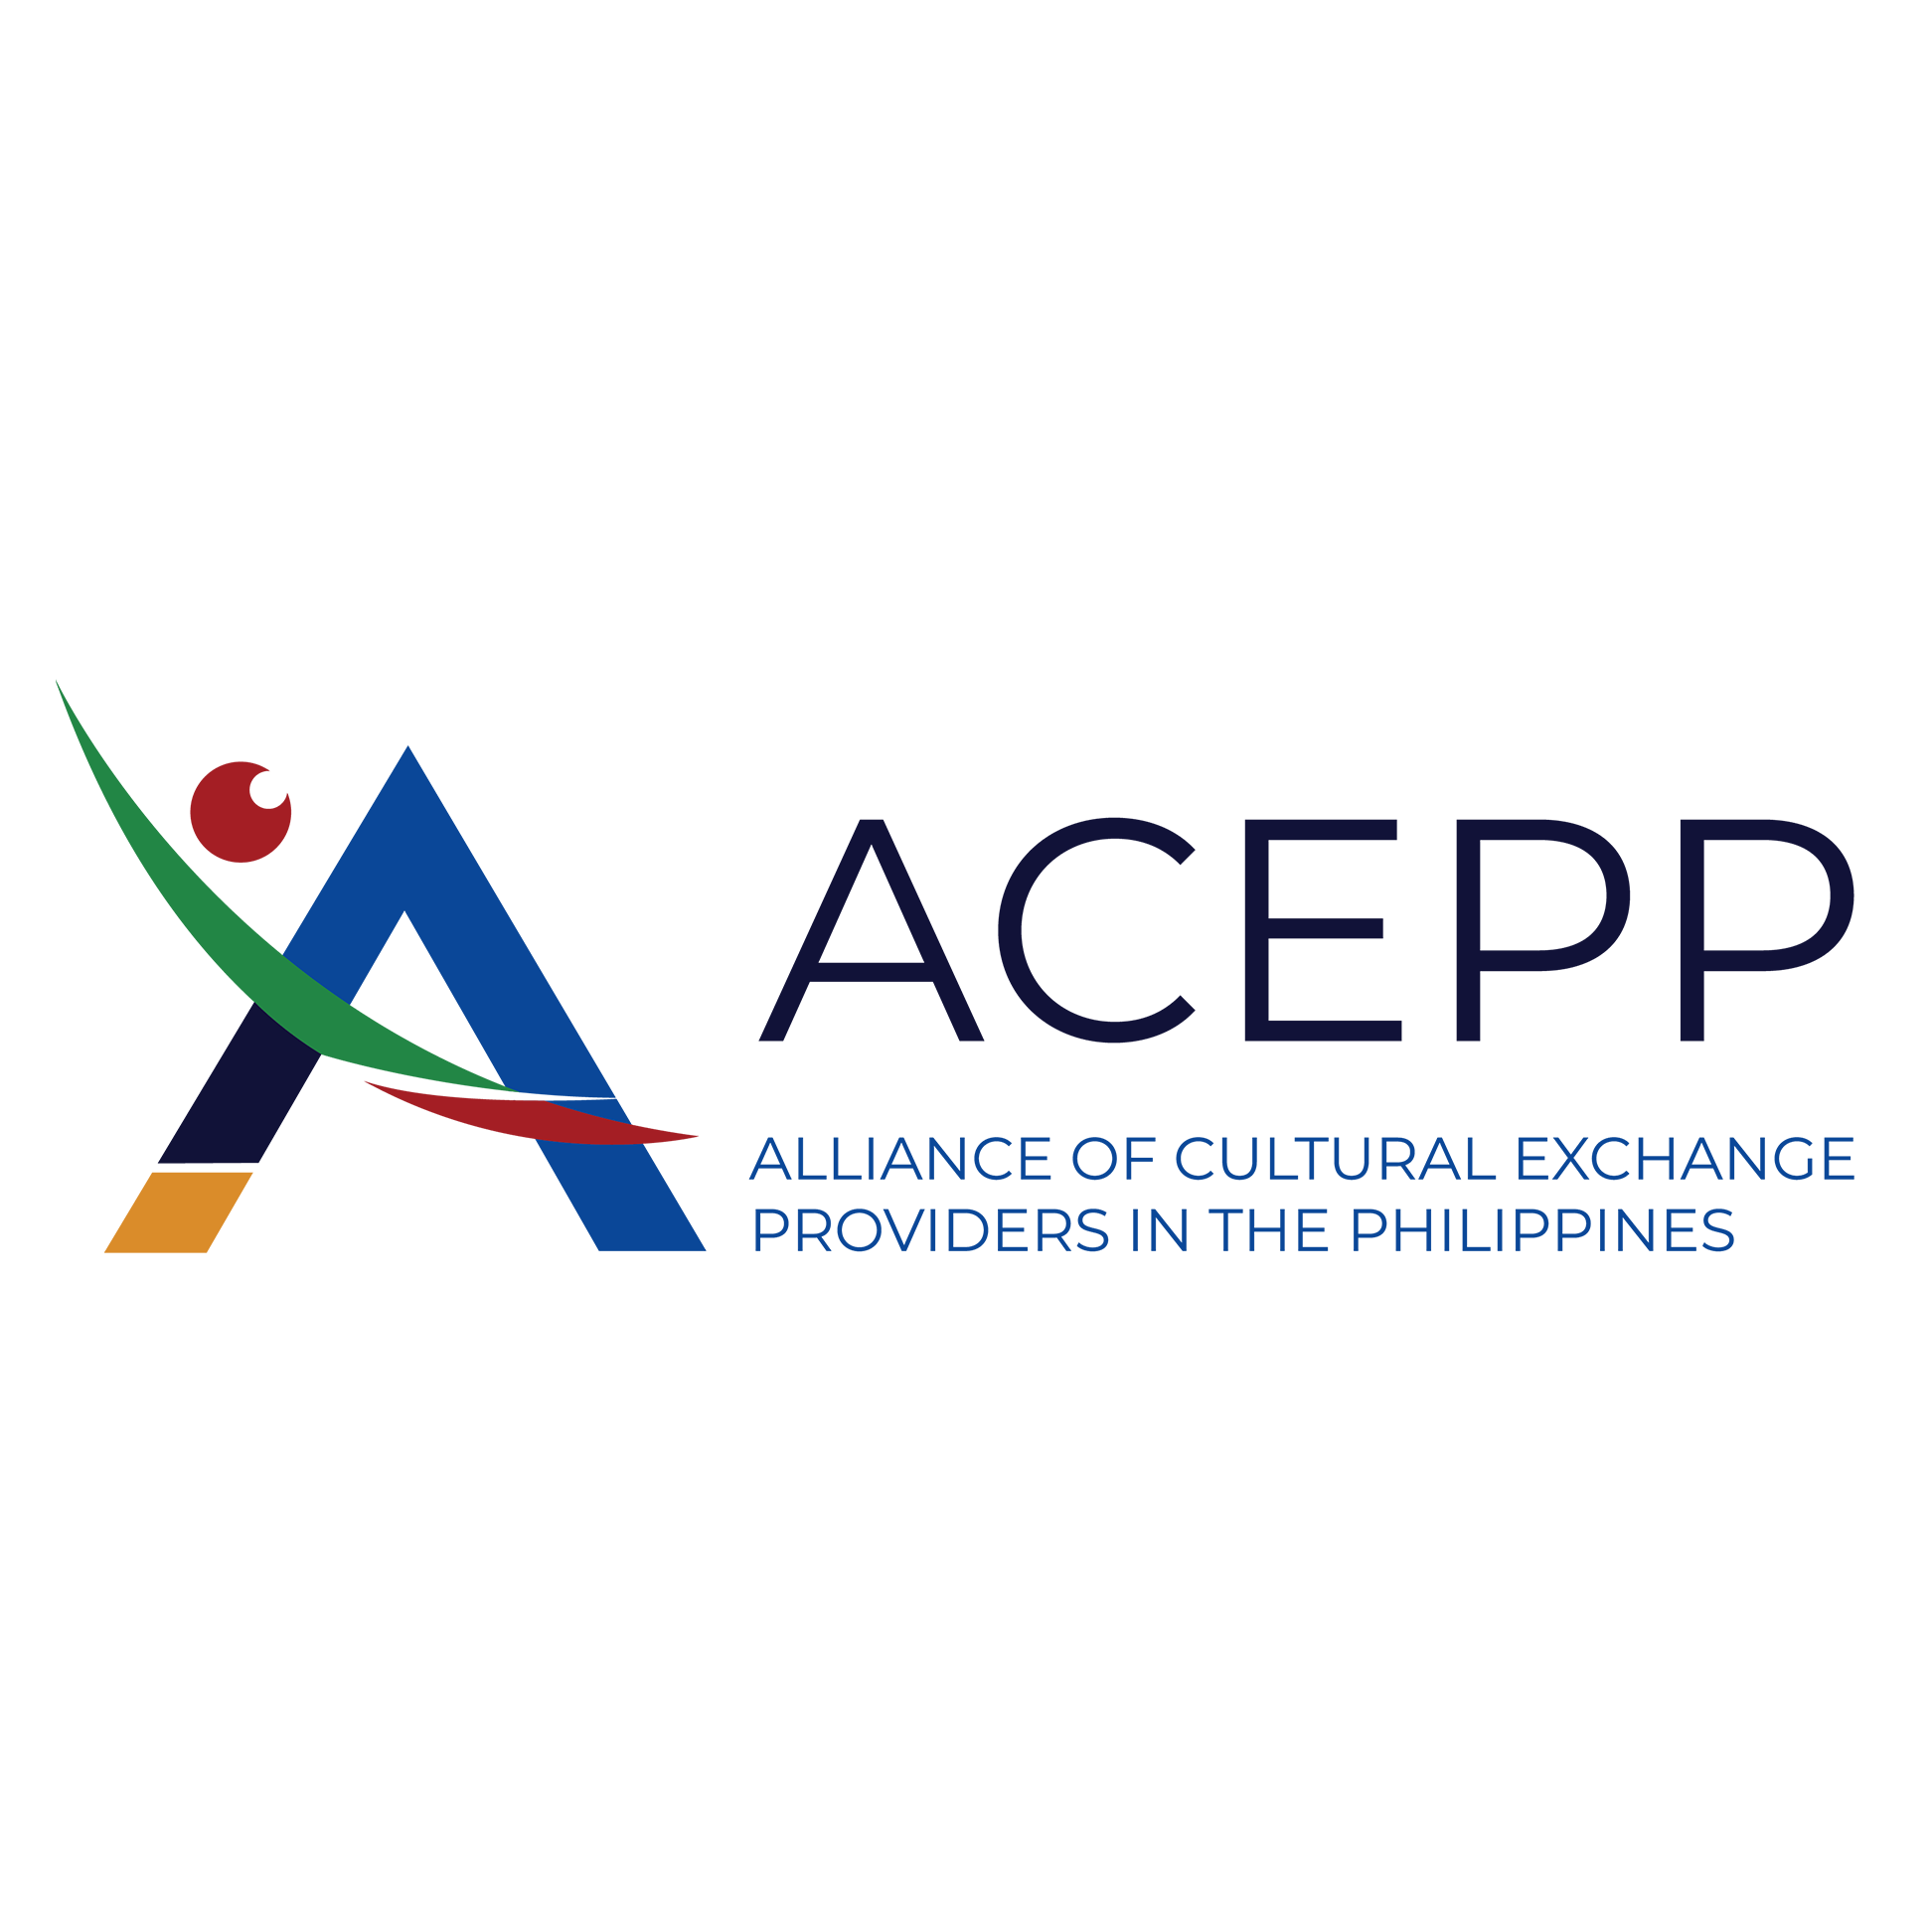 Image containing the logo of Alliance of Cultural Exchange Providers in the Philippines